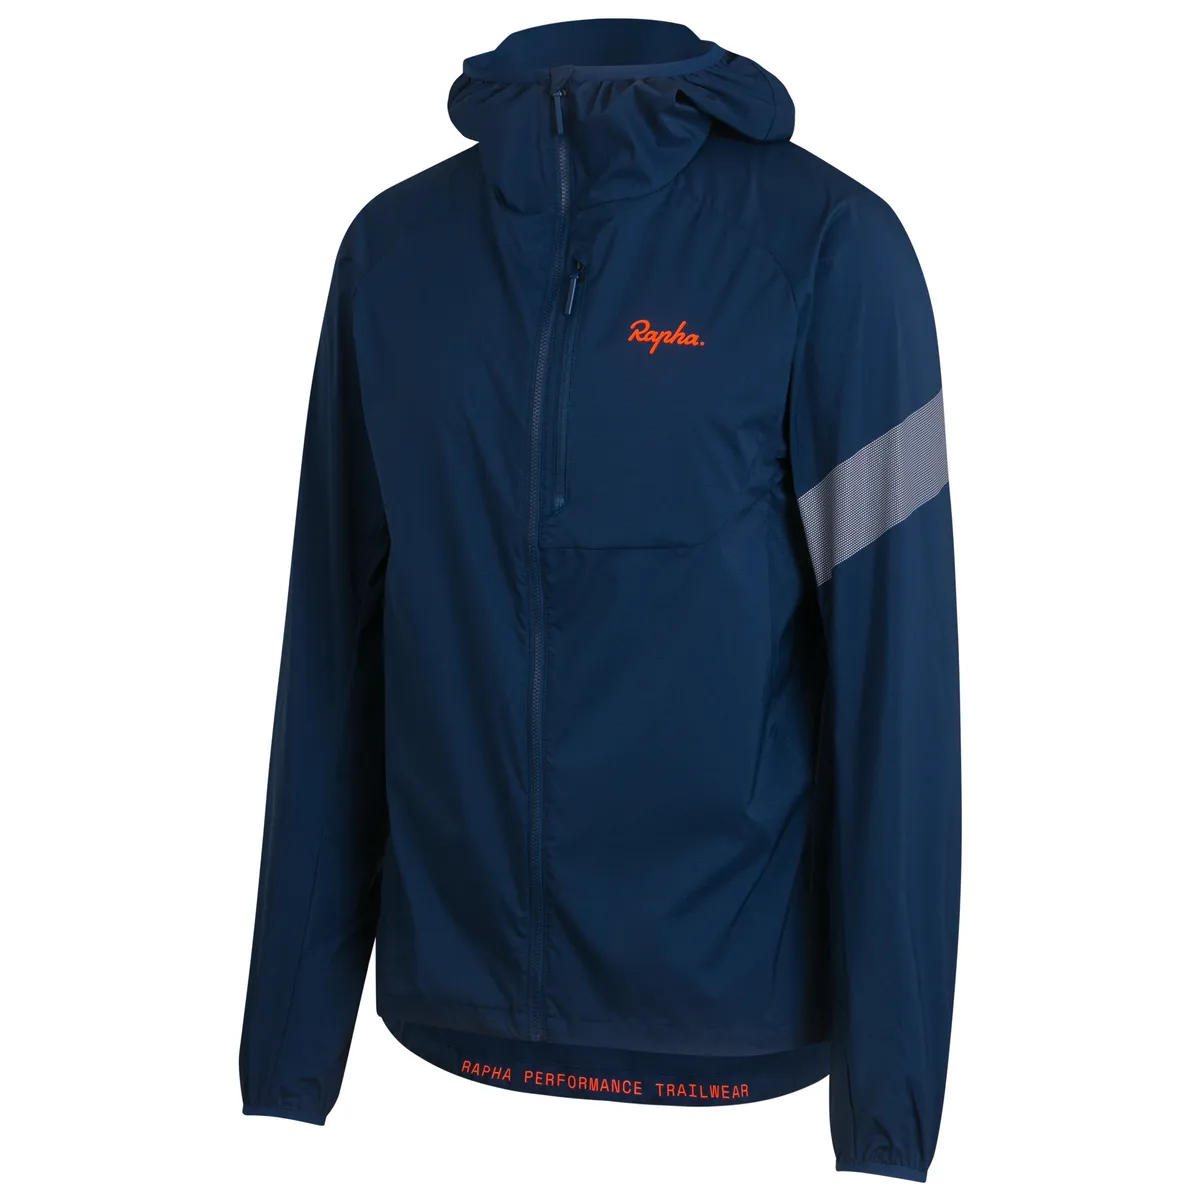 Rapha Trail lightweight Jacket in Pageant Blue and Scarlet Ibis